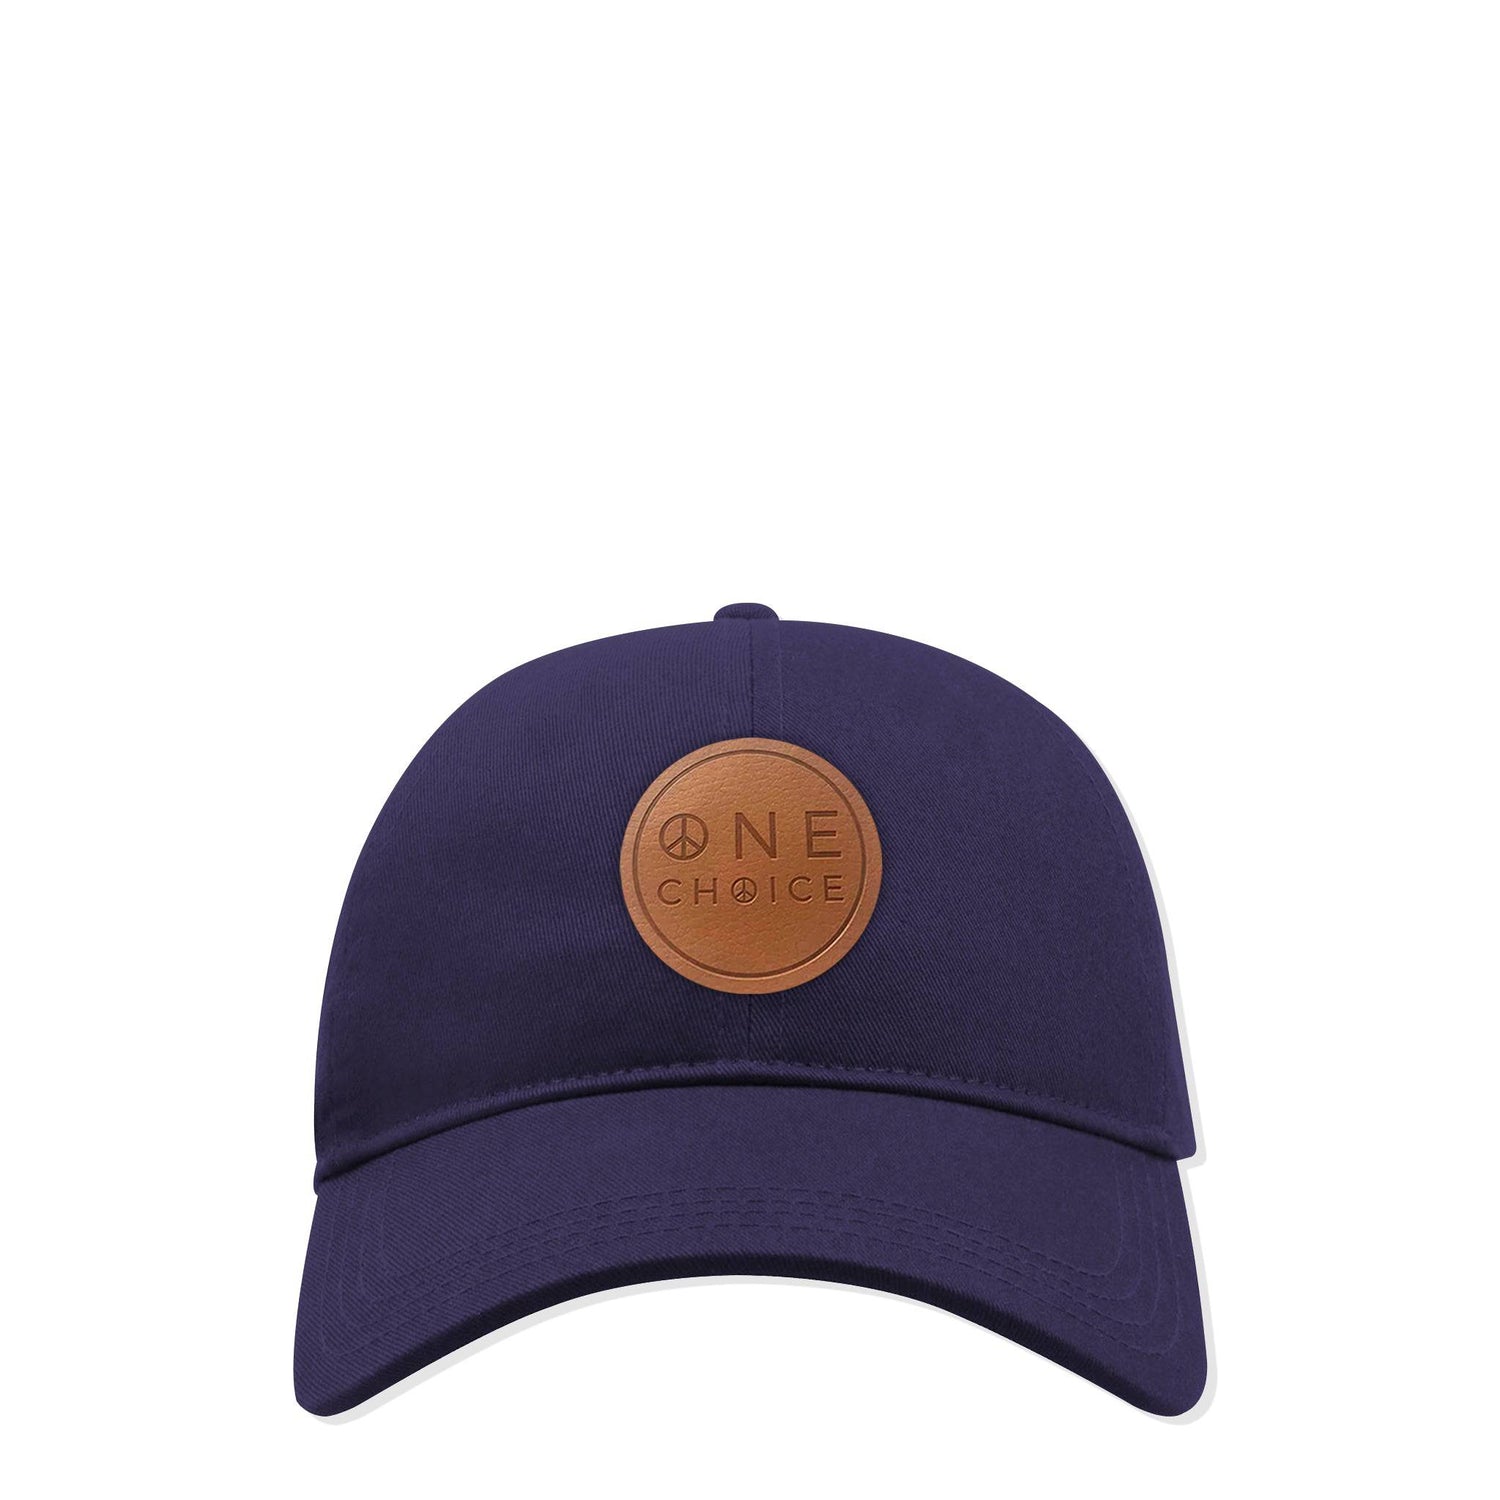 One Choice Navy Dad Hat - Organic Cotton - One Choice Apparel